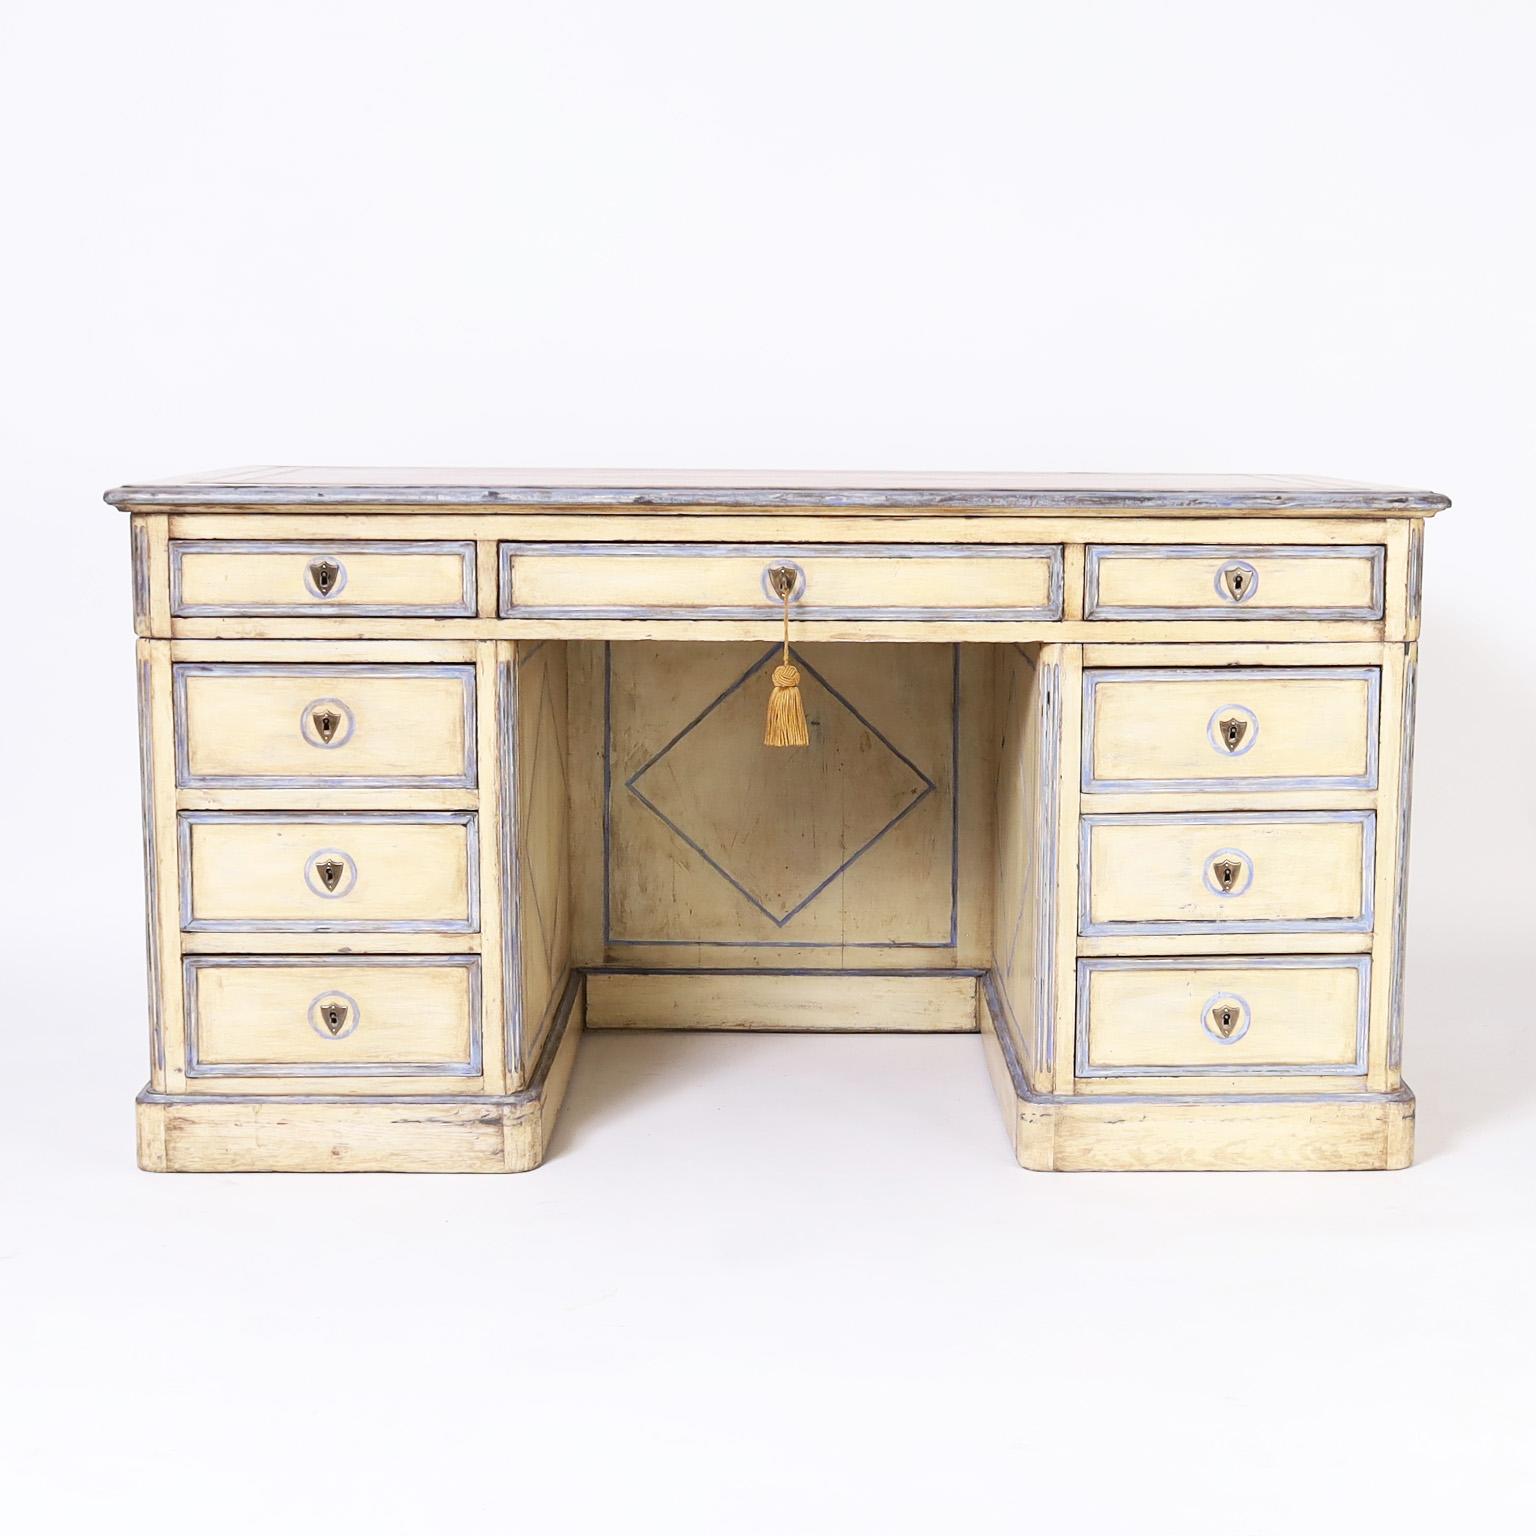 Dynamic 19th century kneehole desk with a brown tooled leather top over a three piece pedestal base with nine drawers and two pullout trays retaining the original yellow and blue paint with geometric and greek key motifs.